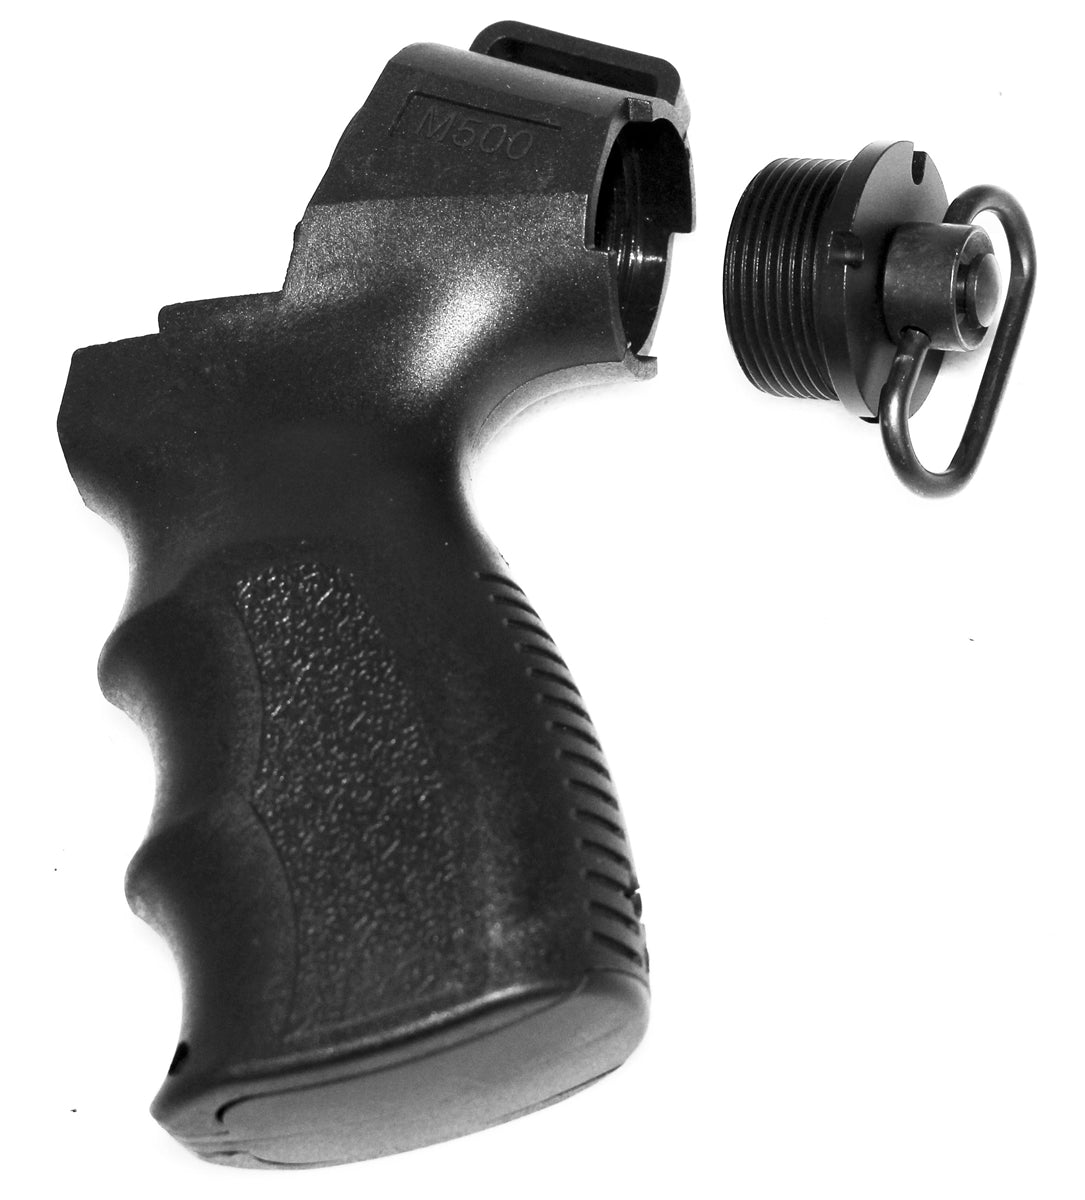 mossberg 590 grip and rear cap.